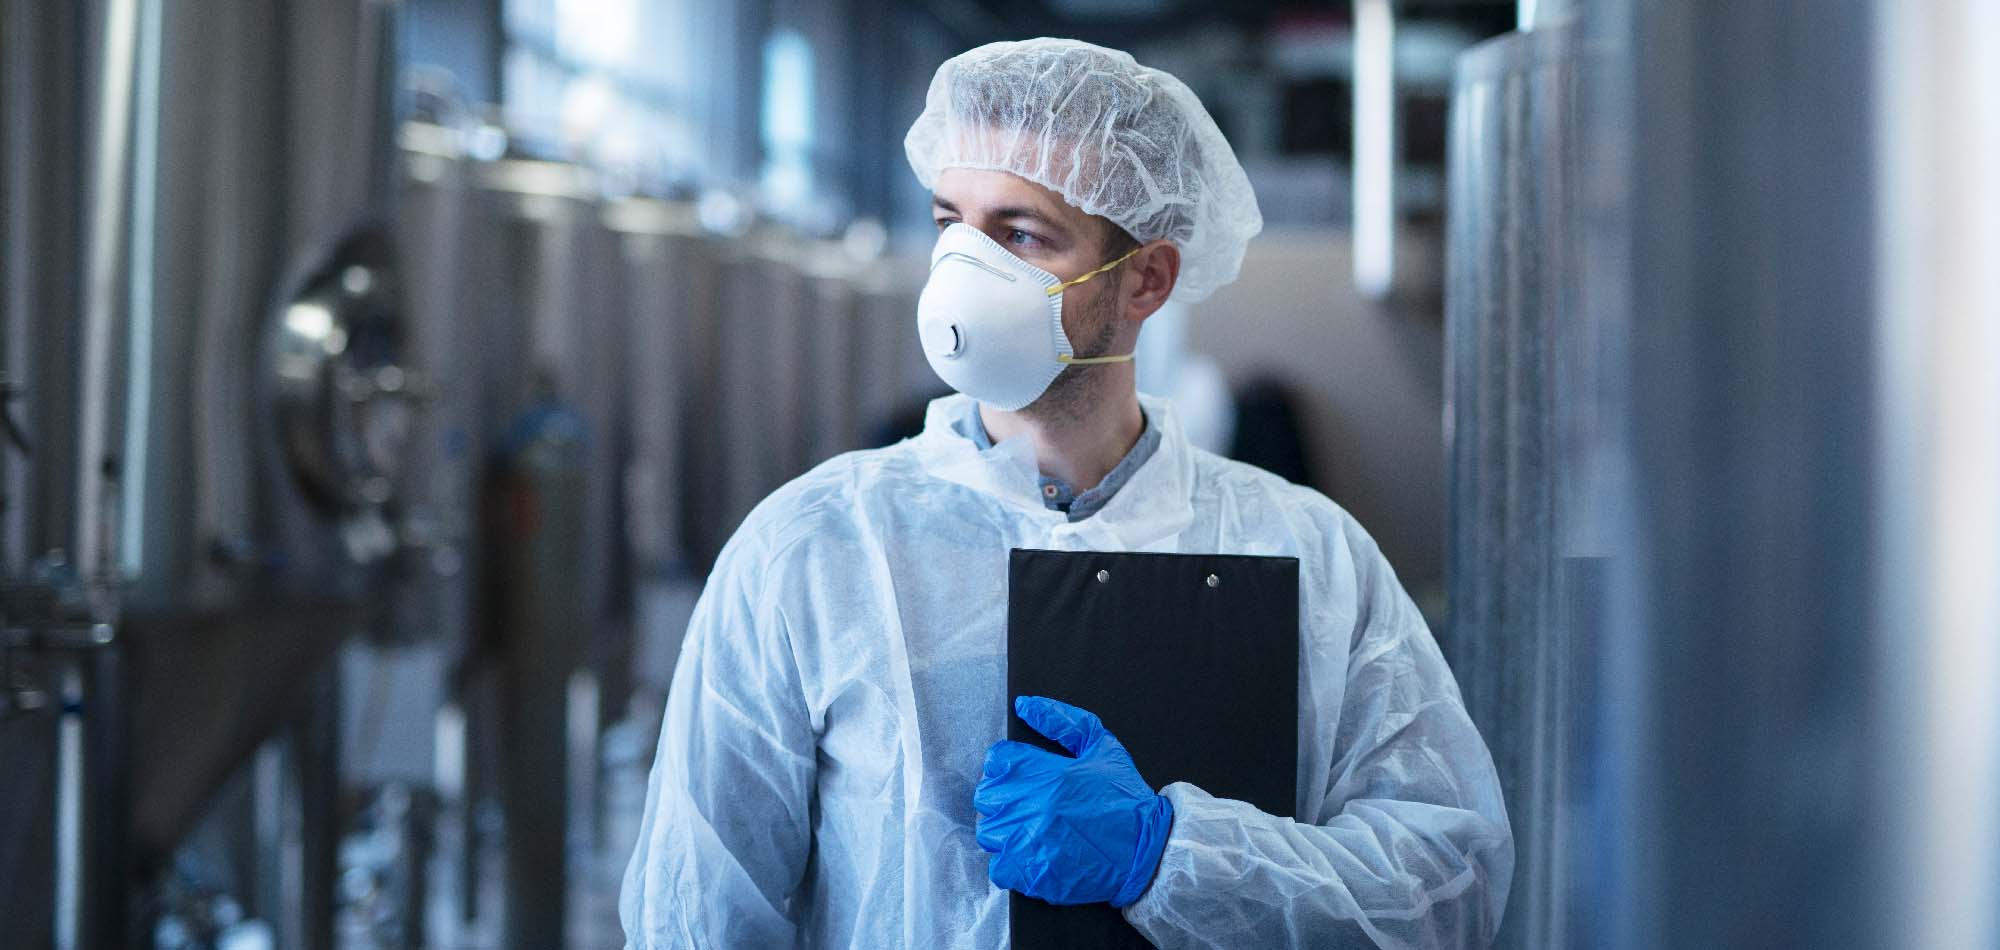 The 5 W’s of Chemical Inventory Management